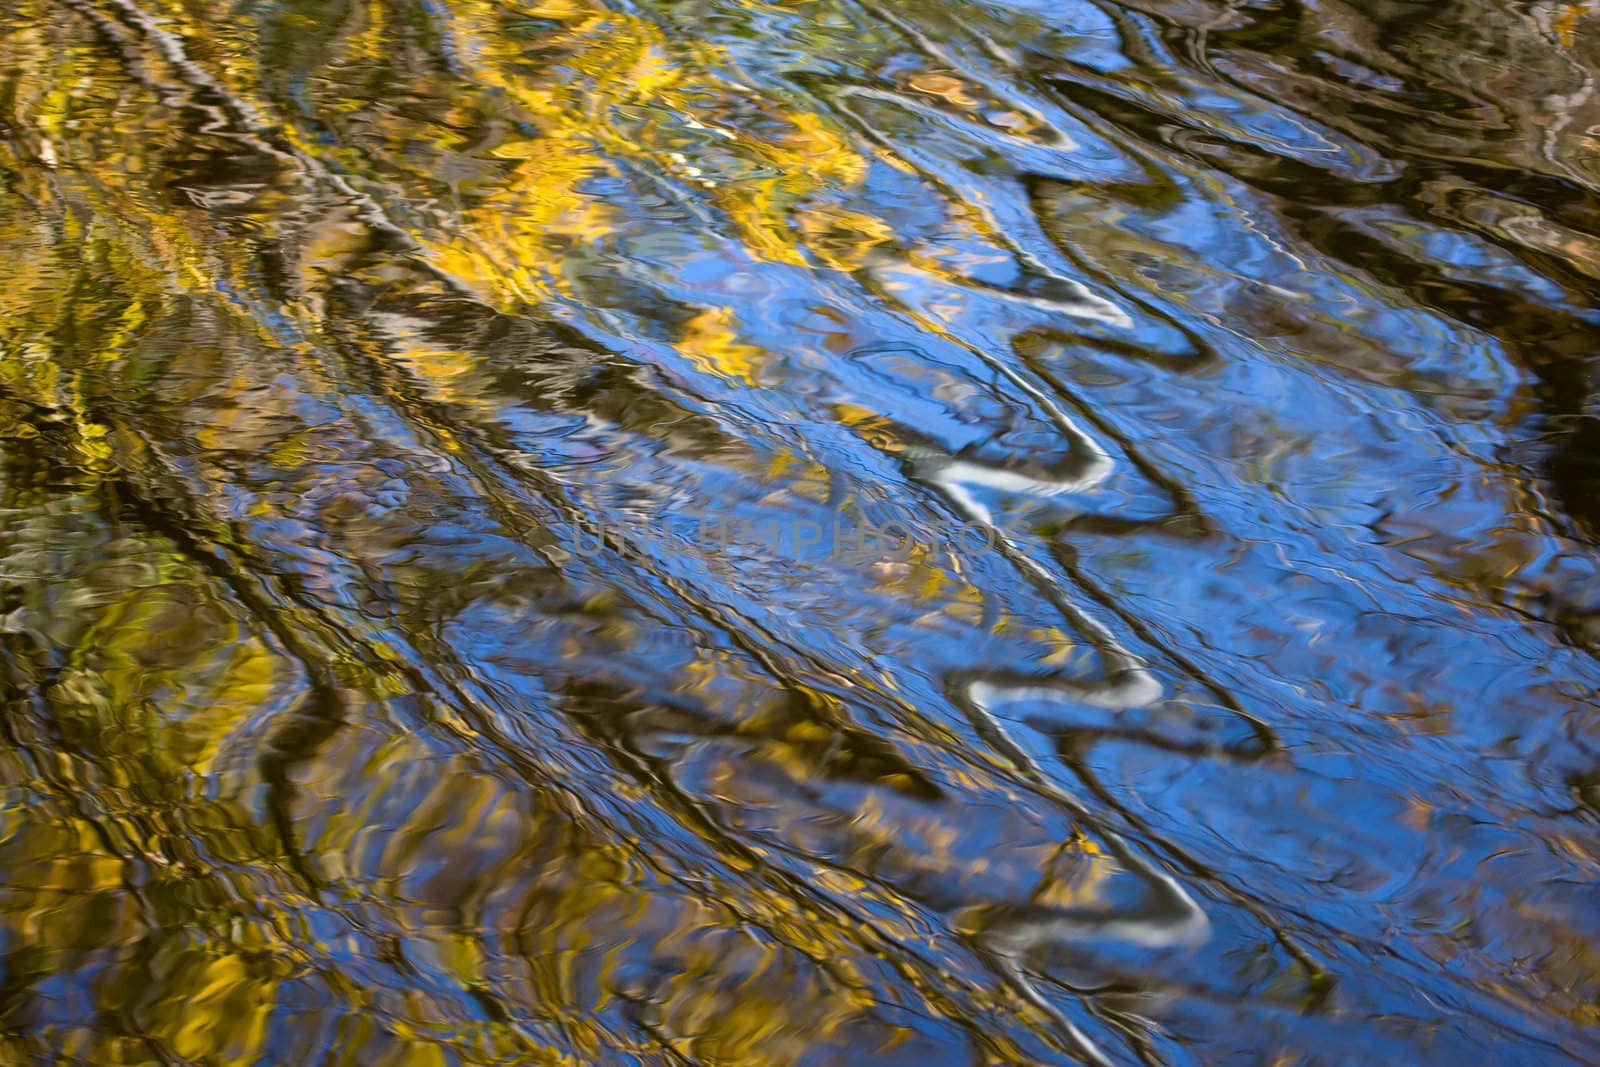 Wavy reflections of autumn colors in the water.